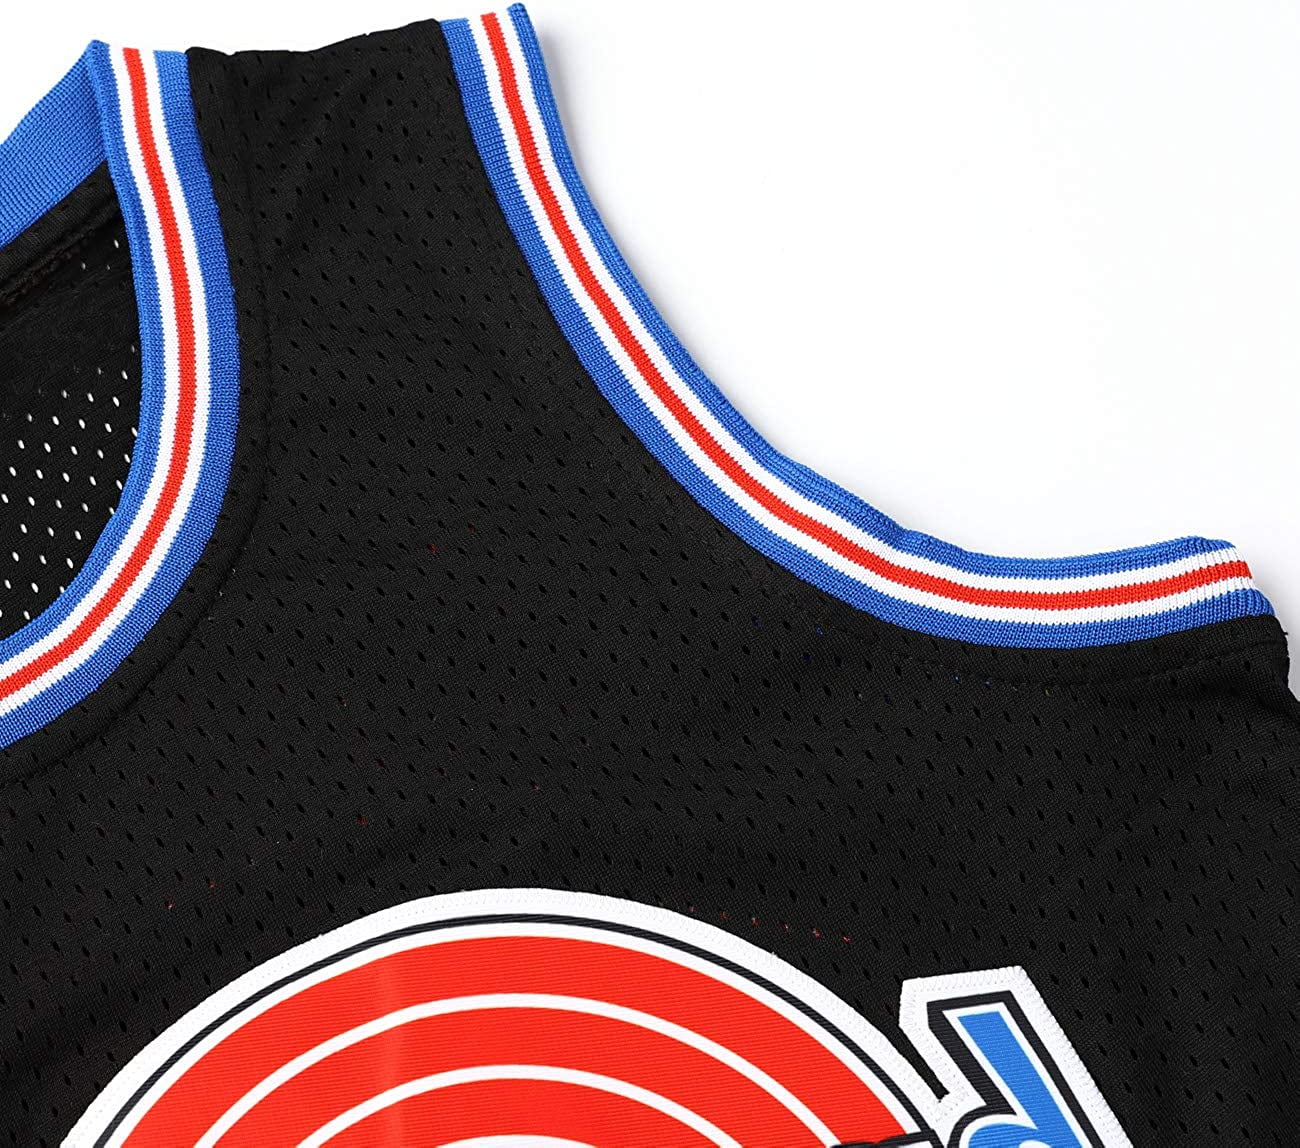 90s Basketball Jersey Shirt for Party, Space Movie #1#10 Jersey for  Halloween,Classic Outfit for Party 